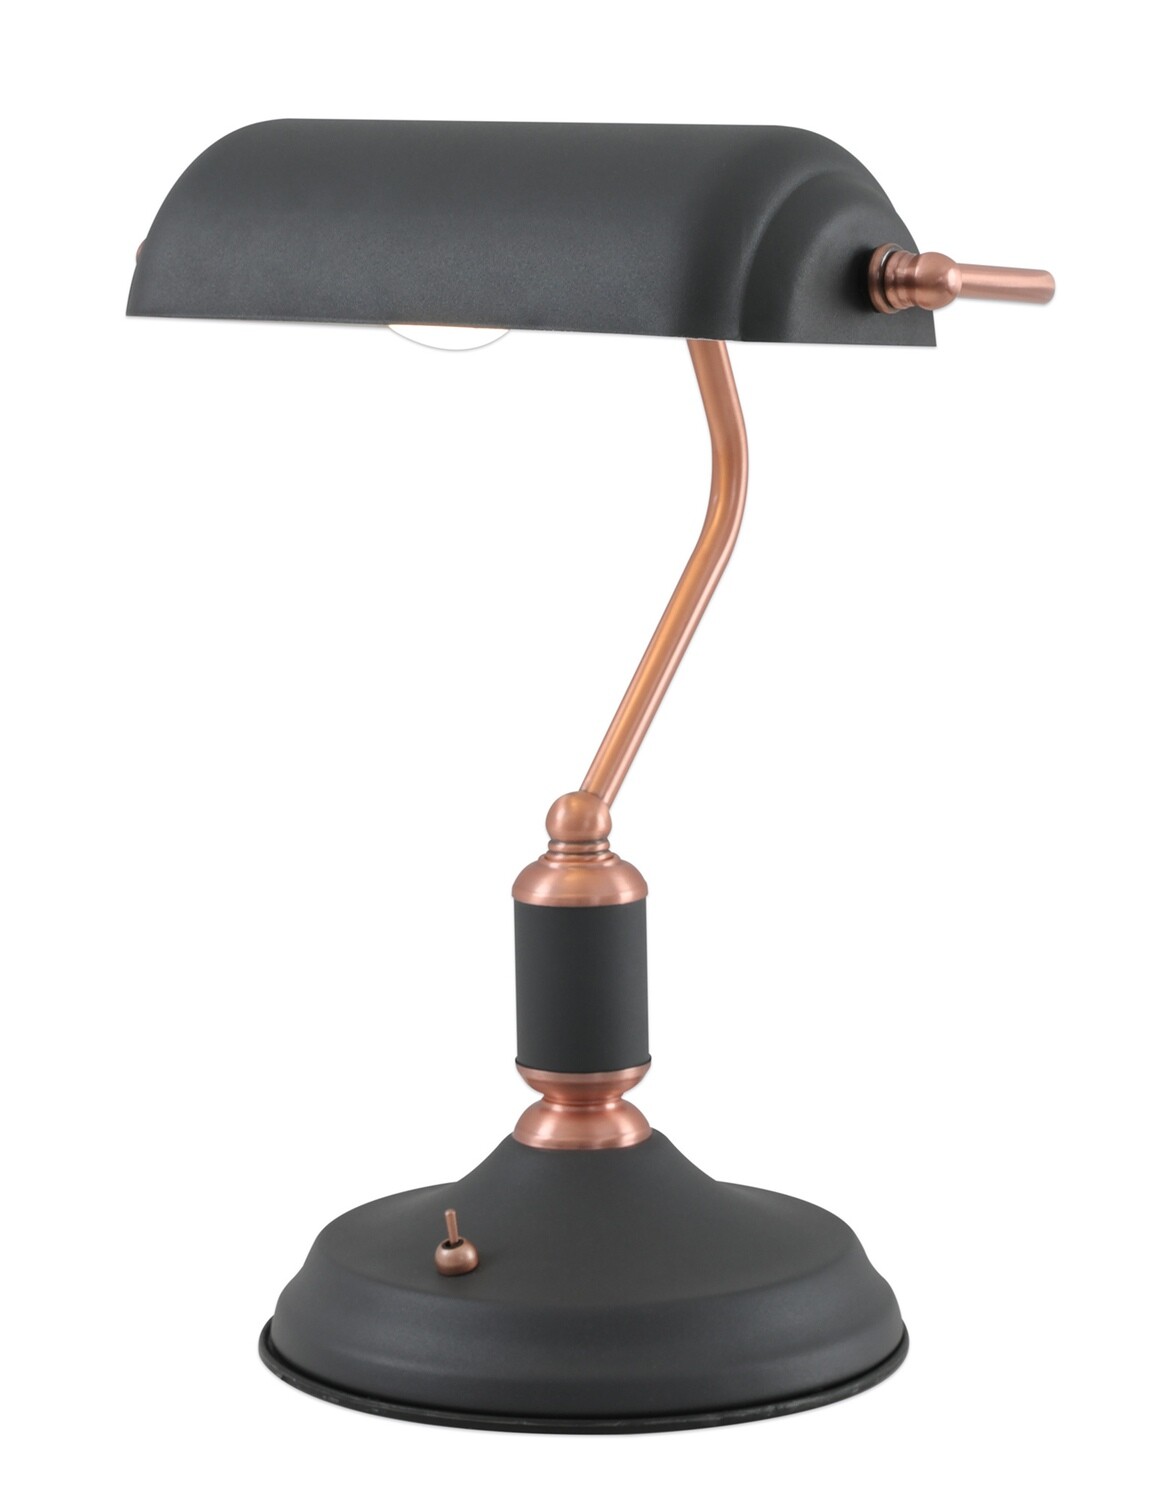 Lumina Table Lamp 1 Light With Toggle Switch, Sand Black/Copper